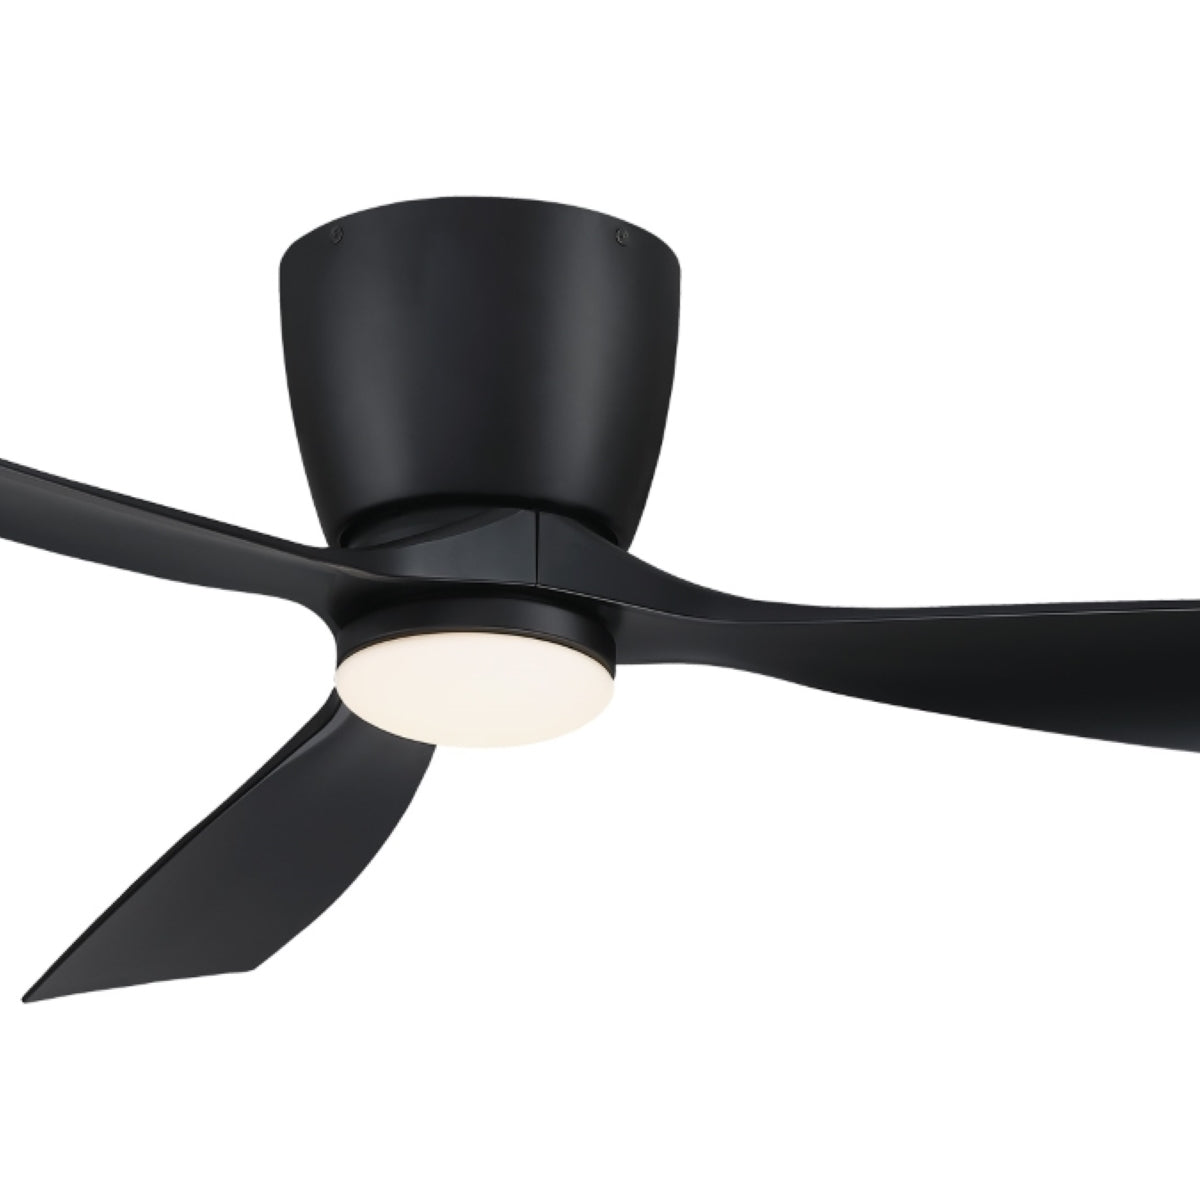 Klinch 44 Inch Low Profile Outdoor Ceiling Fan With Light and Remote